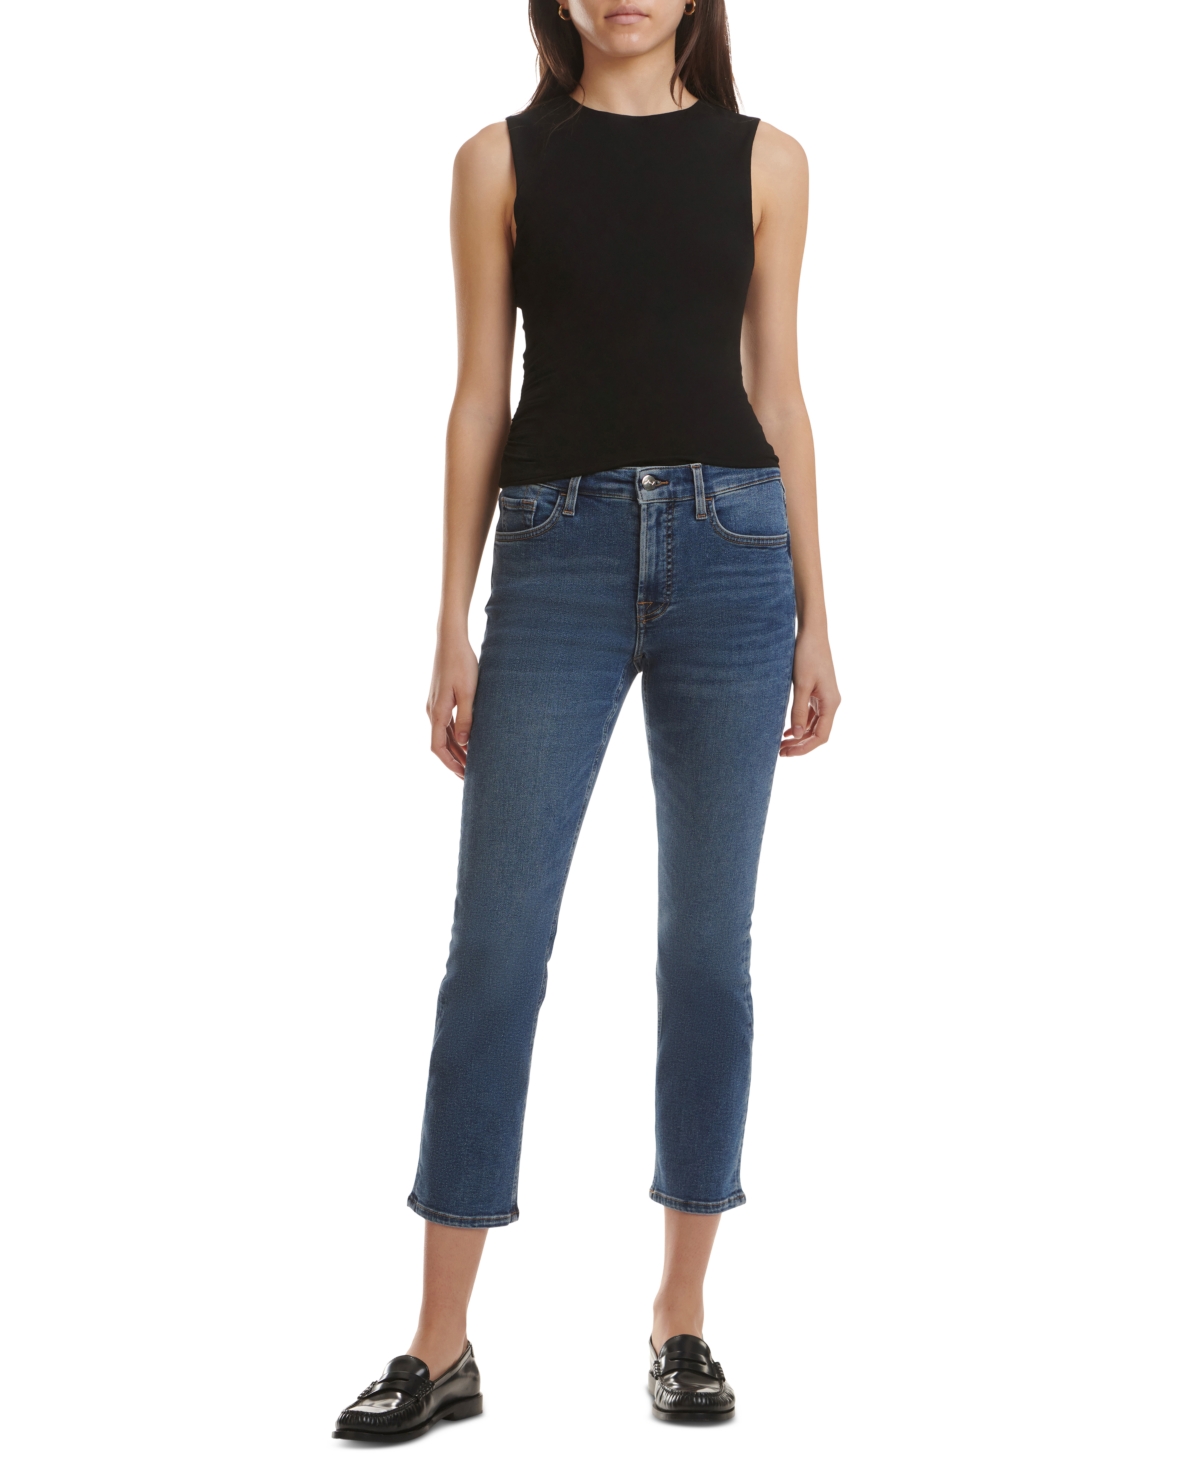 JEN7 by 7 For All Mankind Women's Slim-Straight Ankle Jeans